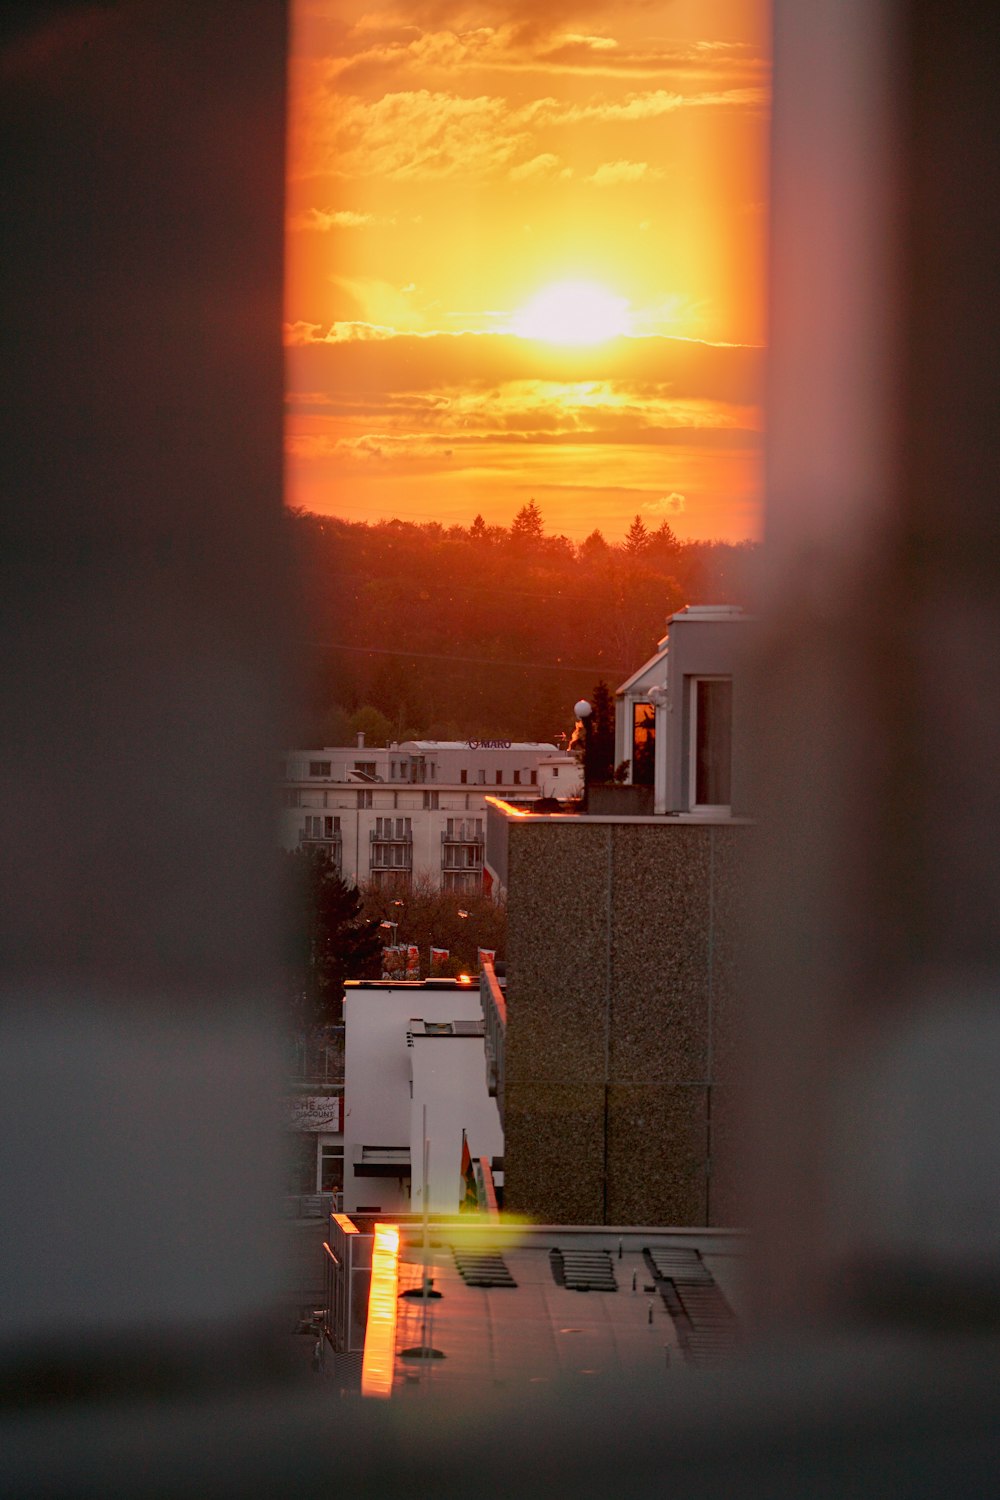 the sun is setting over a city from a window